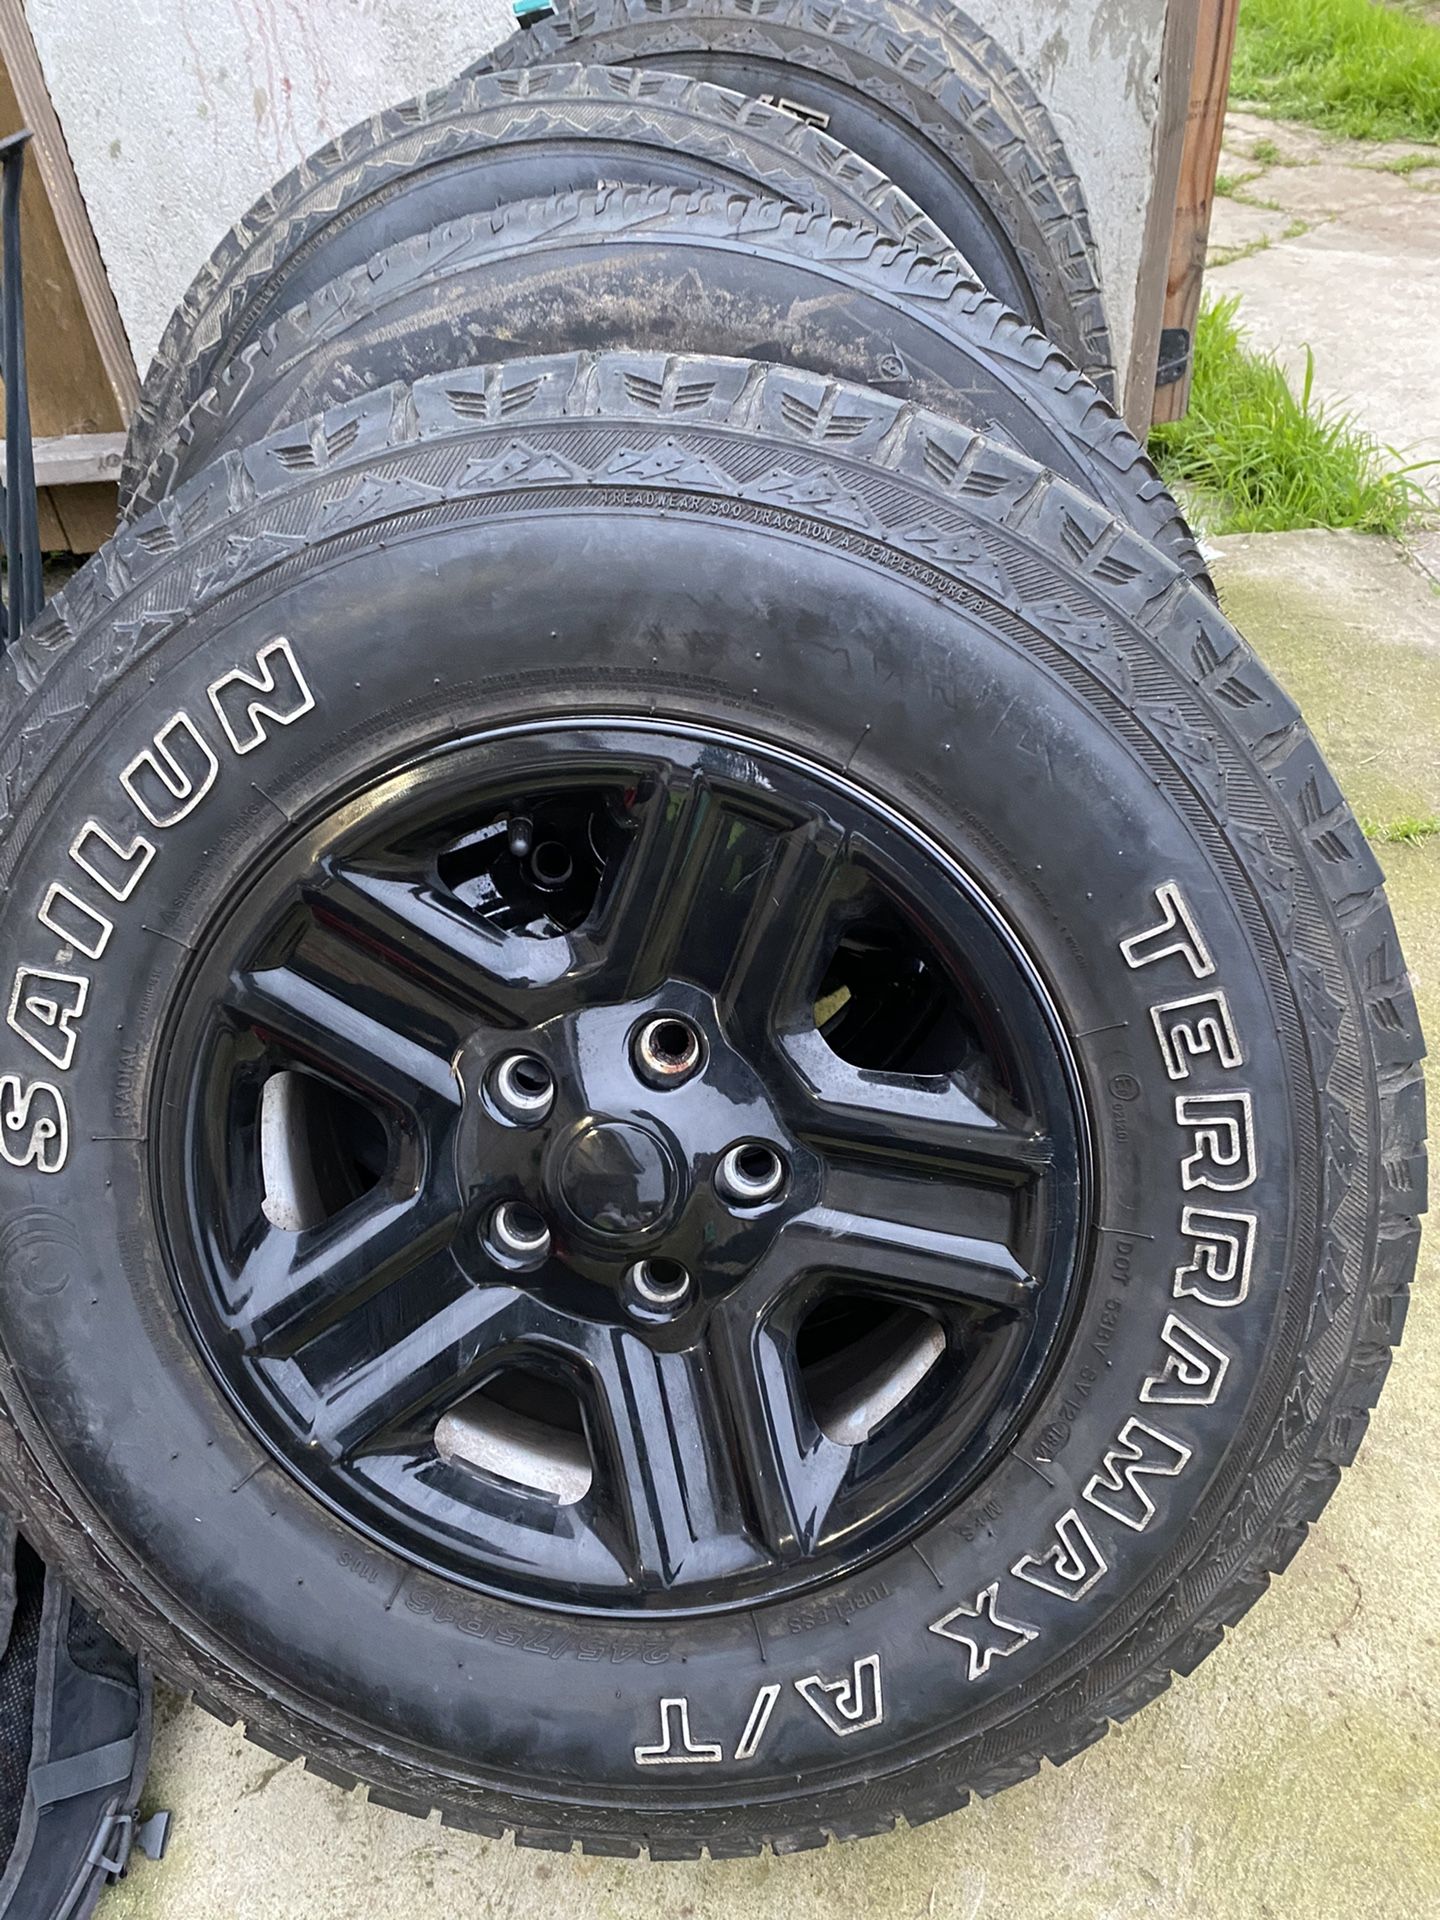 5 Jeep wheels and tires 245/75/16 off a 2013